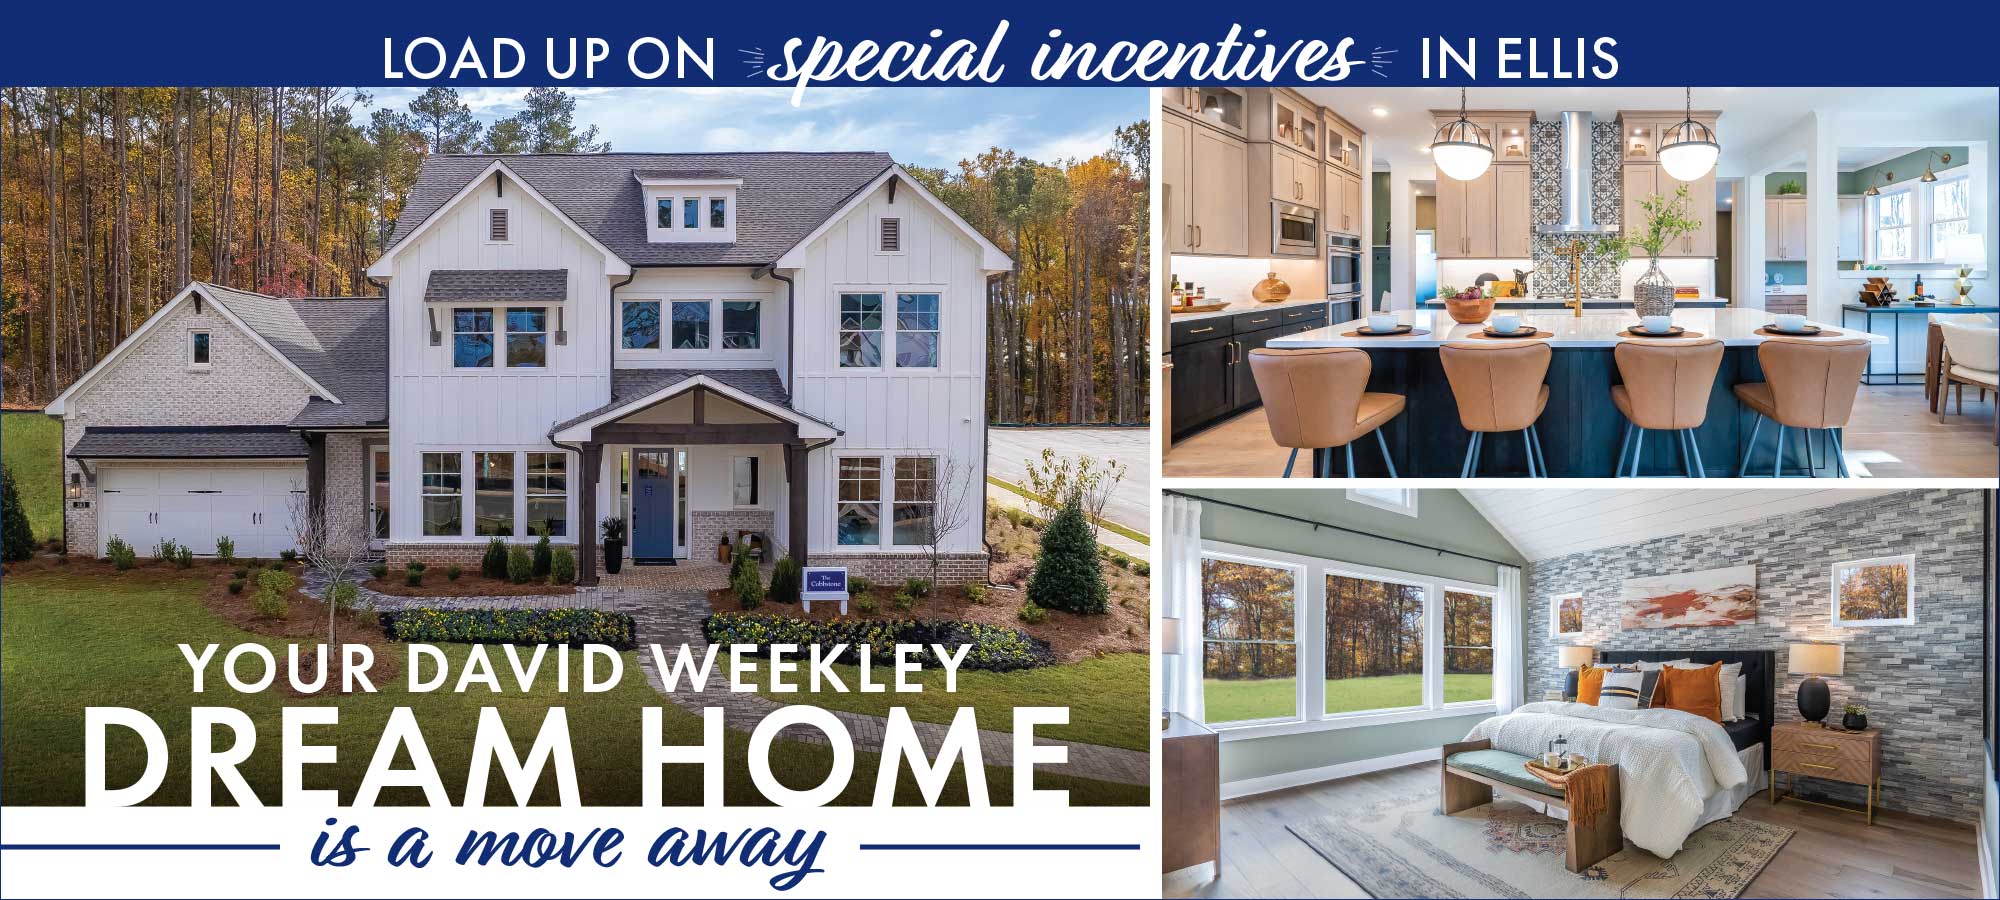 Your David Weekley Dream Home is a Move Away in Ellis